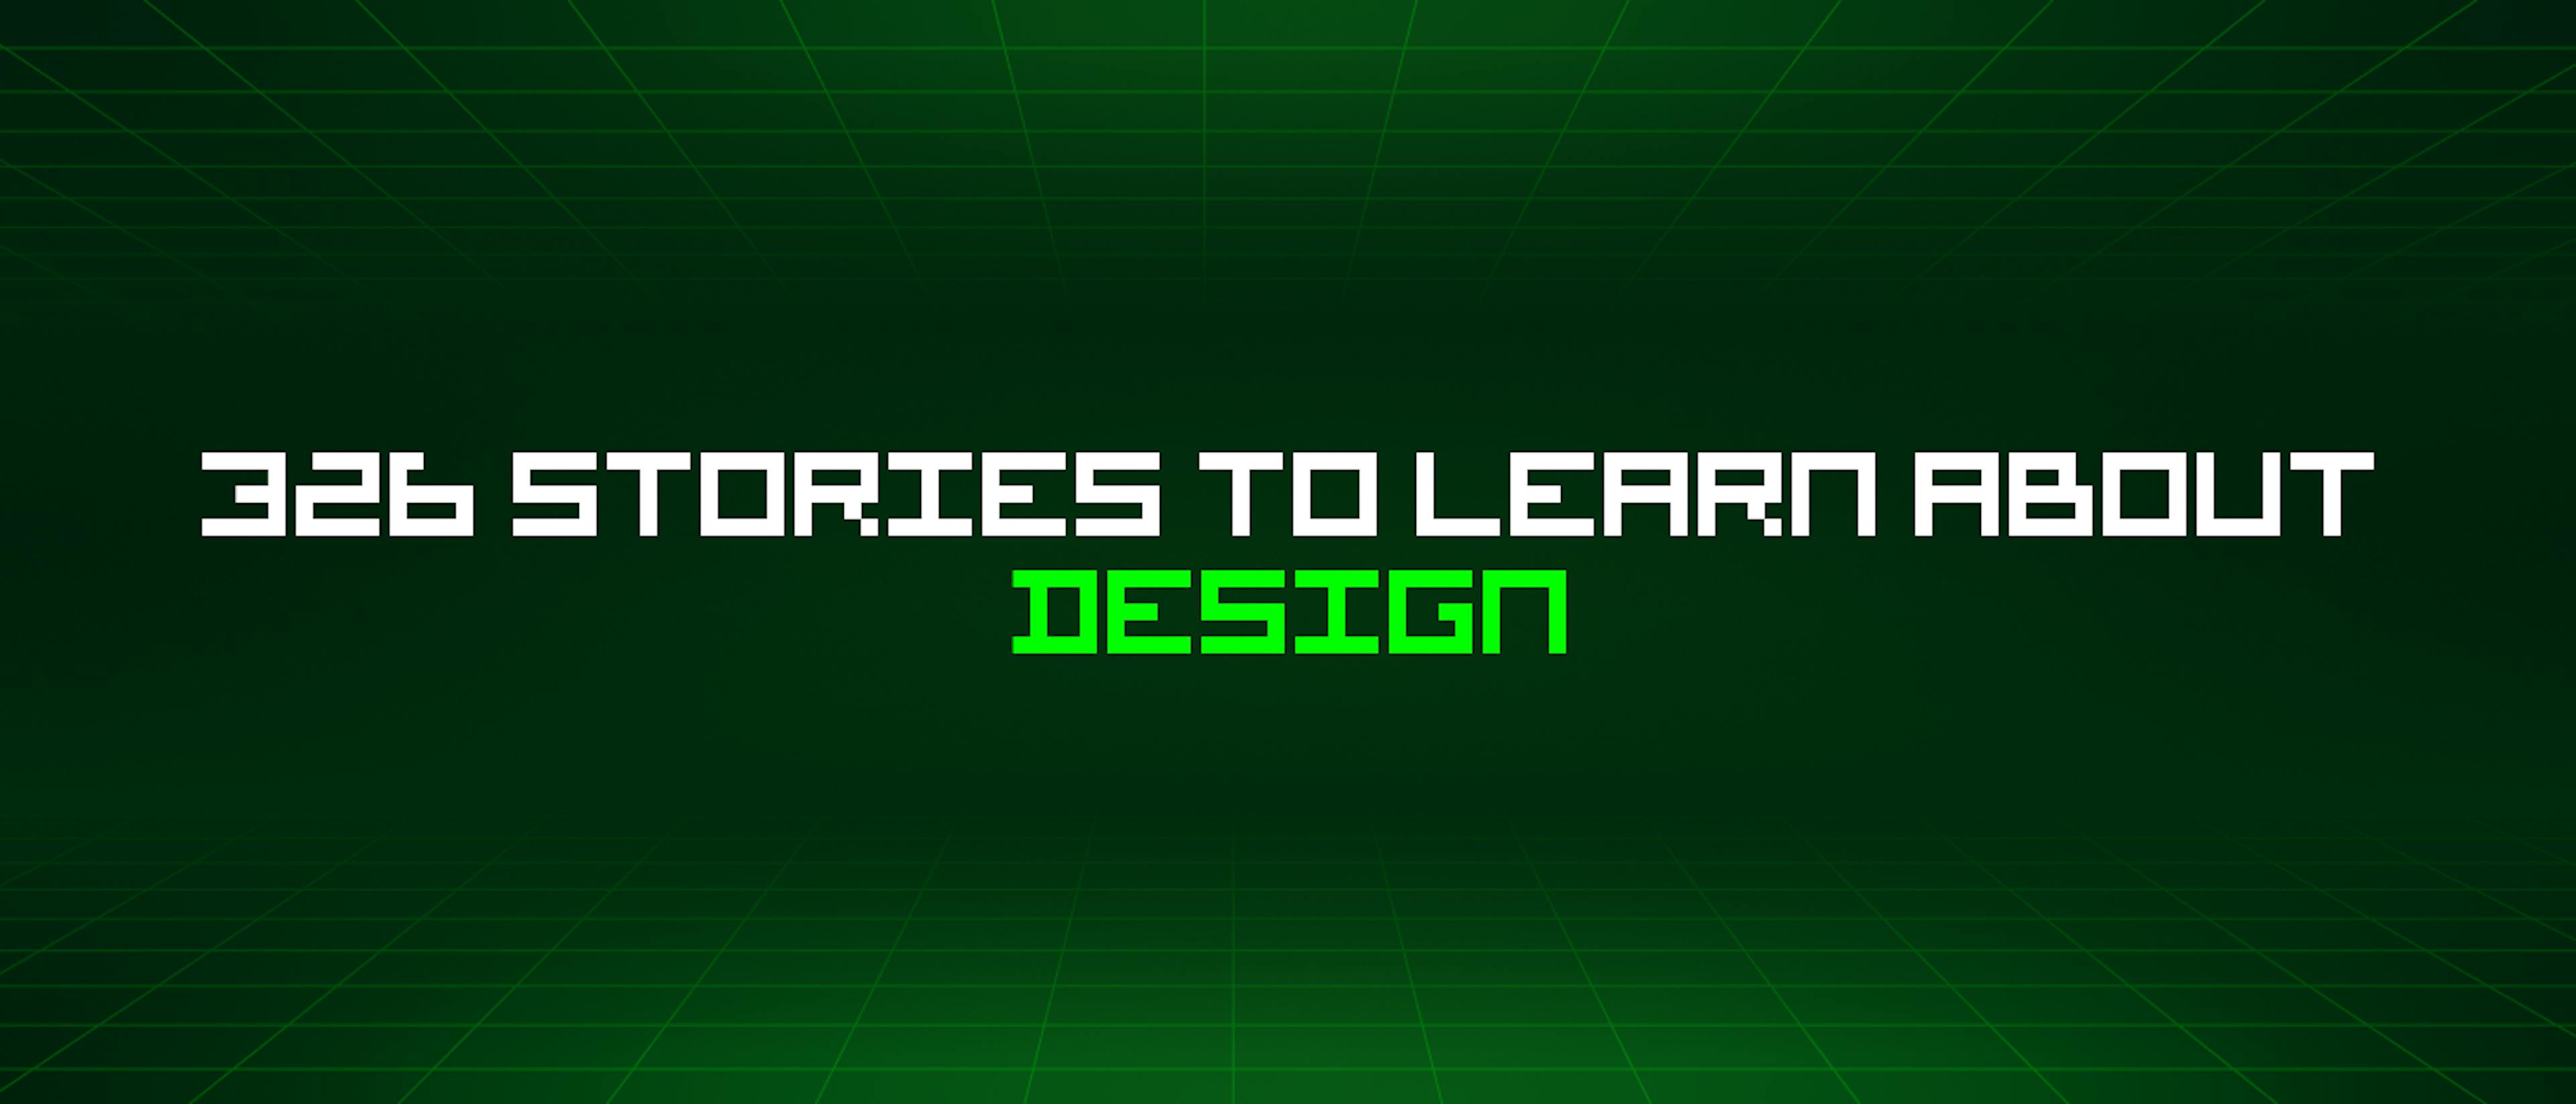 featured image - 326 Stories To Learn About Design